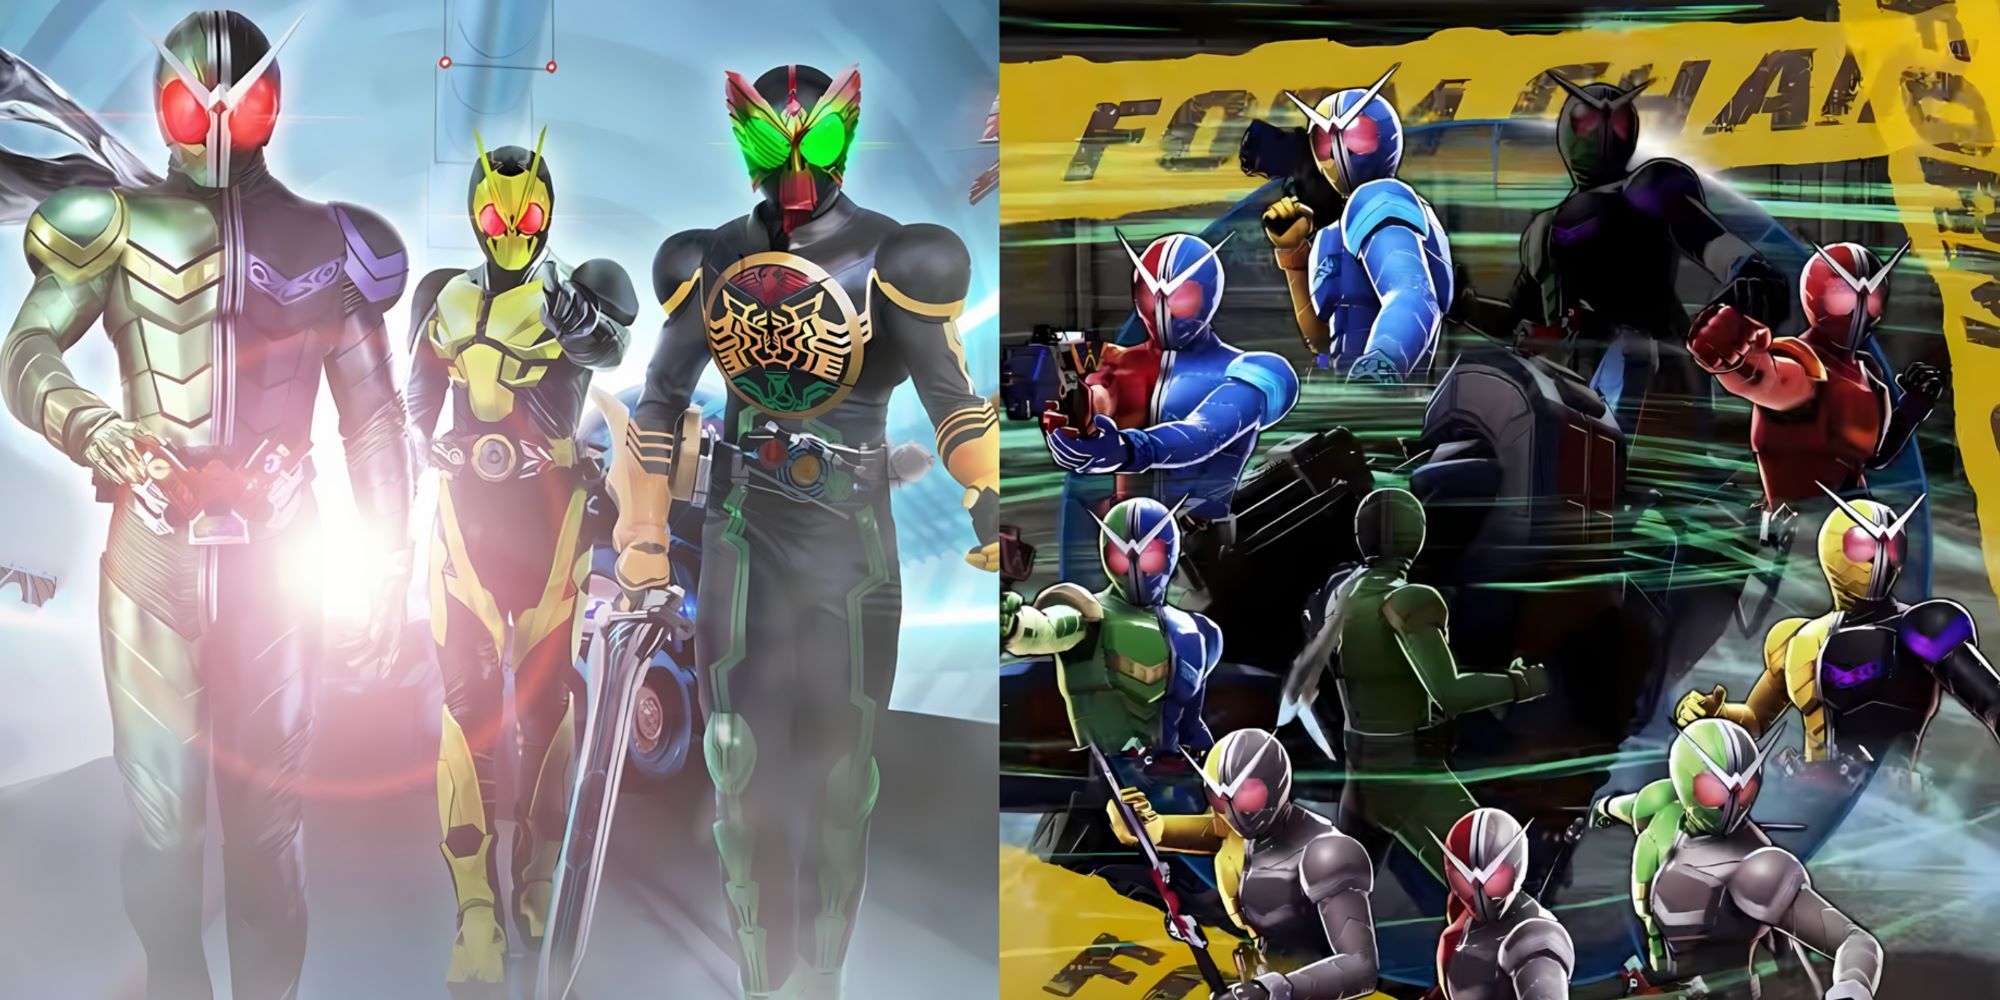 kamen rider memory of heroez cover & form change with kamen rider w, ooo, and zero one, and w form change